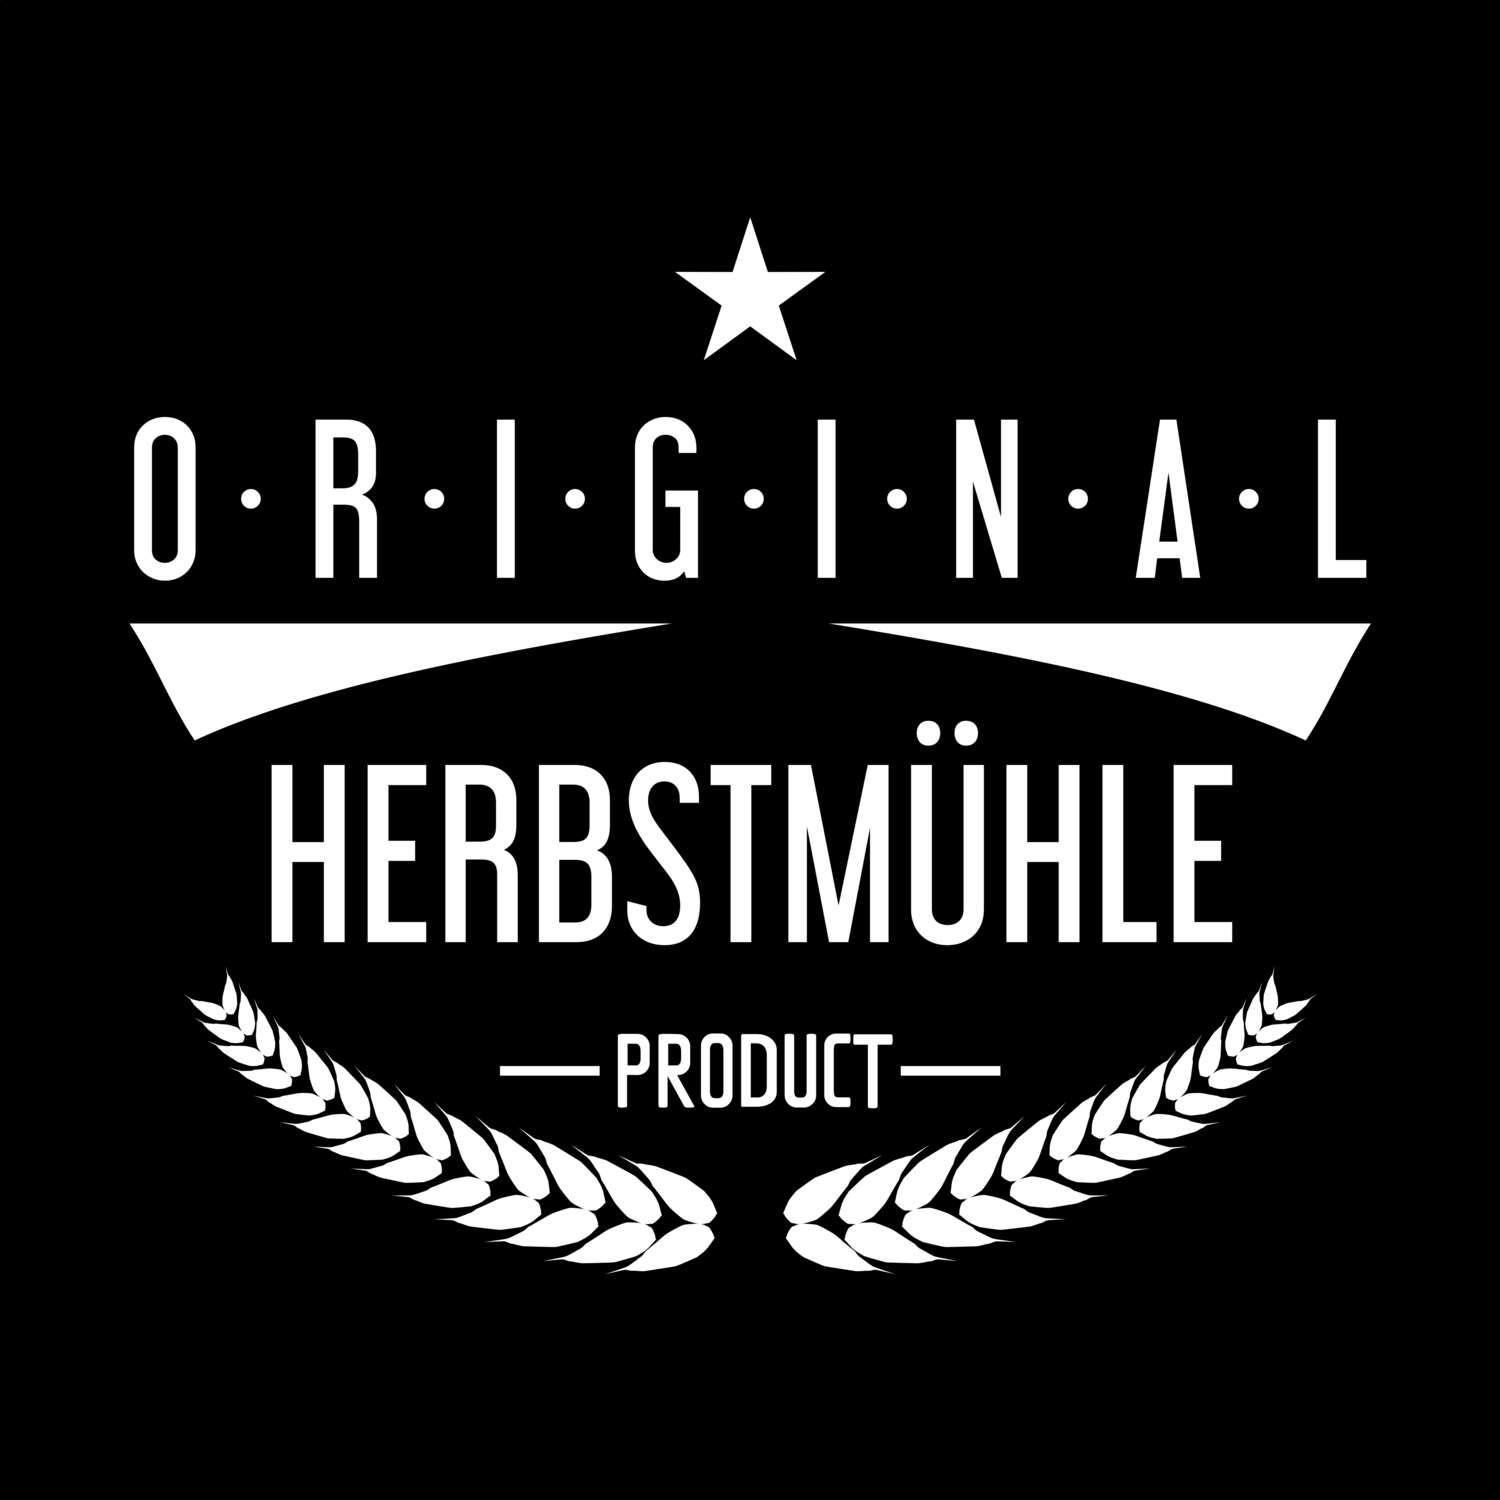 Herbstmühle T-Shirt »Original Product«